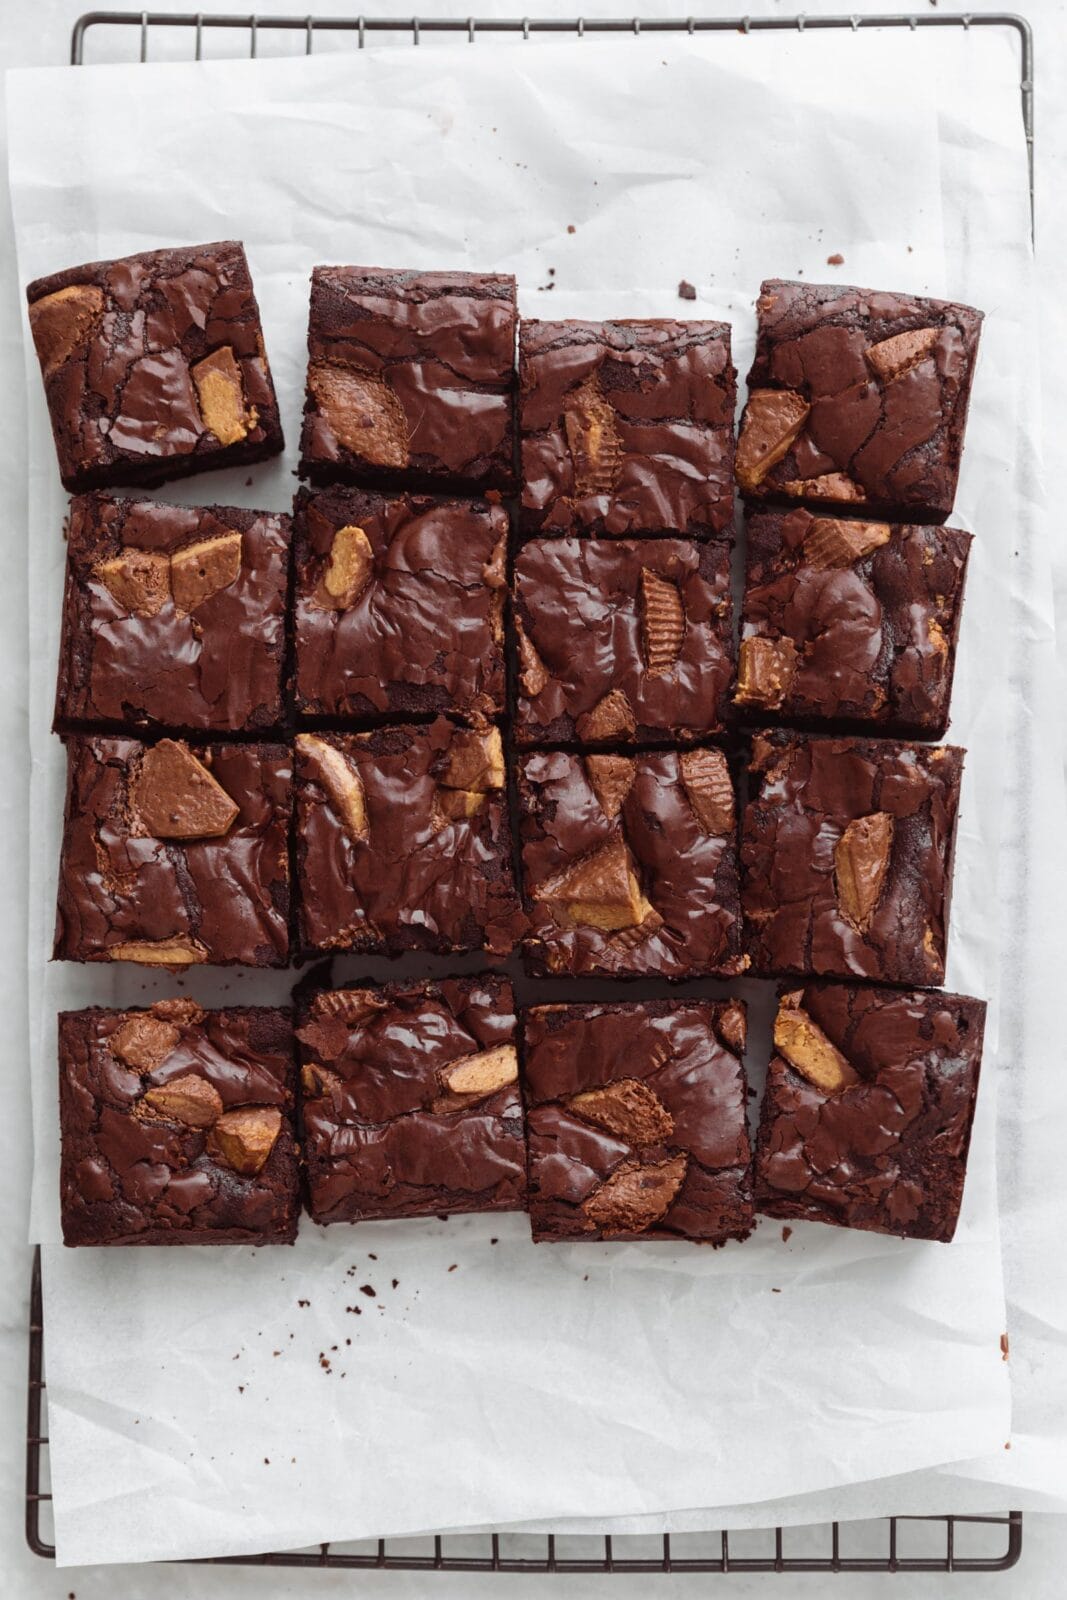 reese's brownies with peanut butter cups